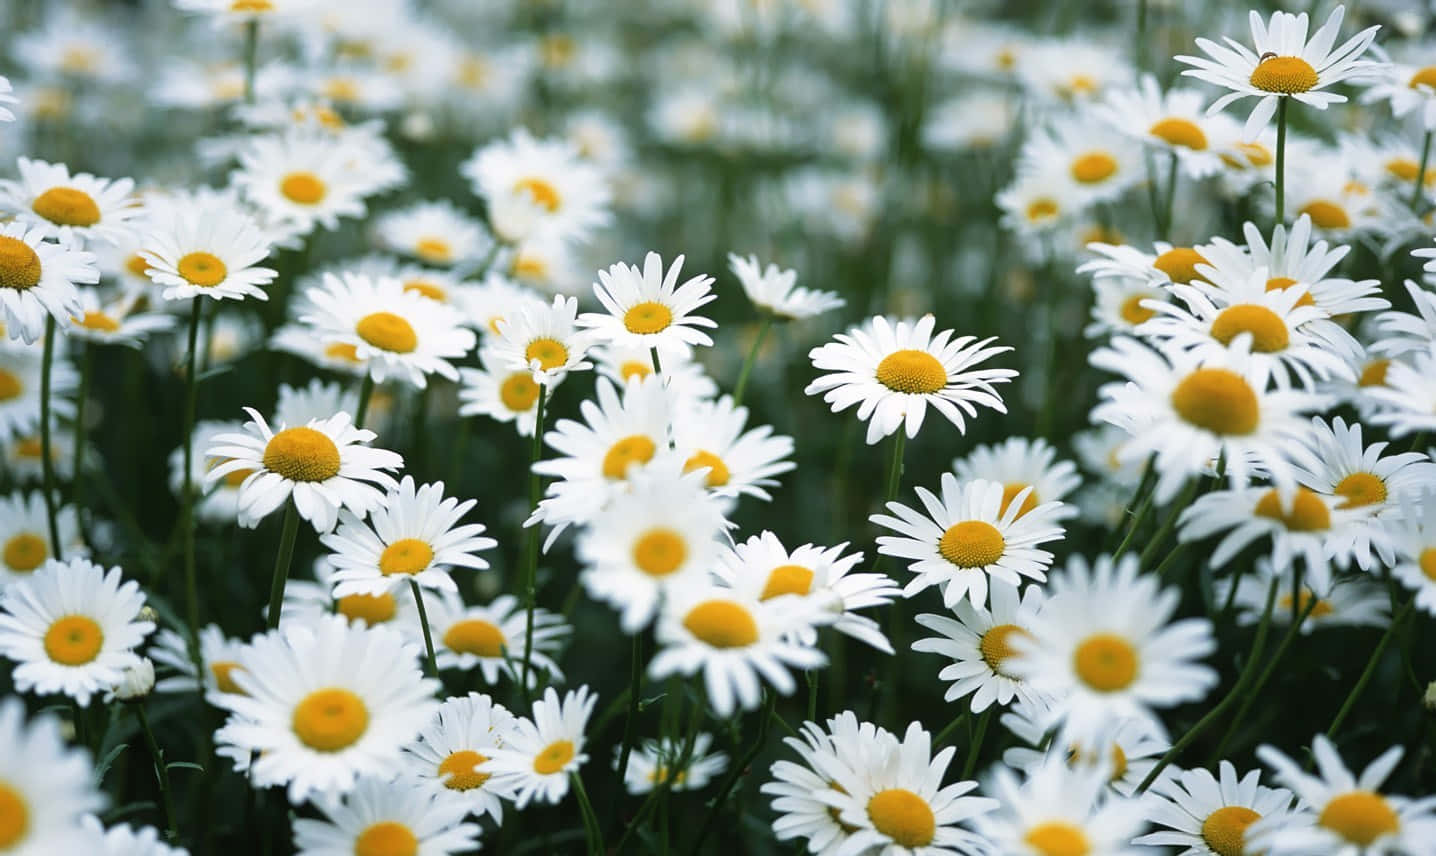 Artistic Shot Of Daisies Background 1436 x 856 Background